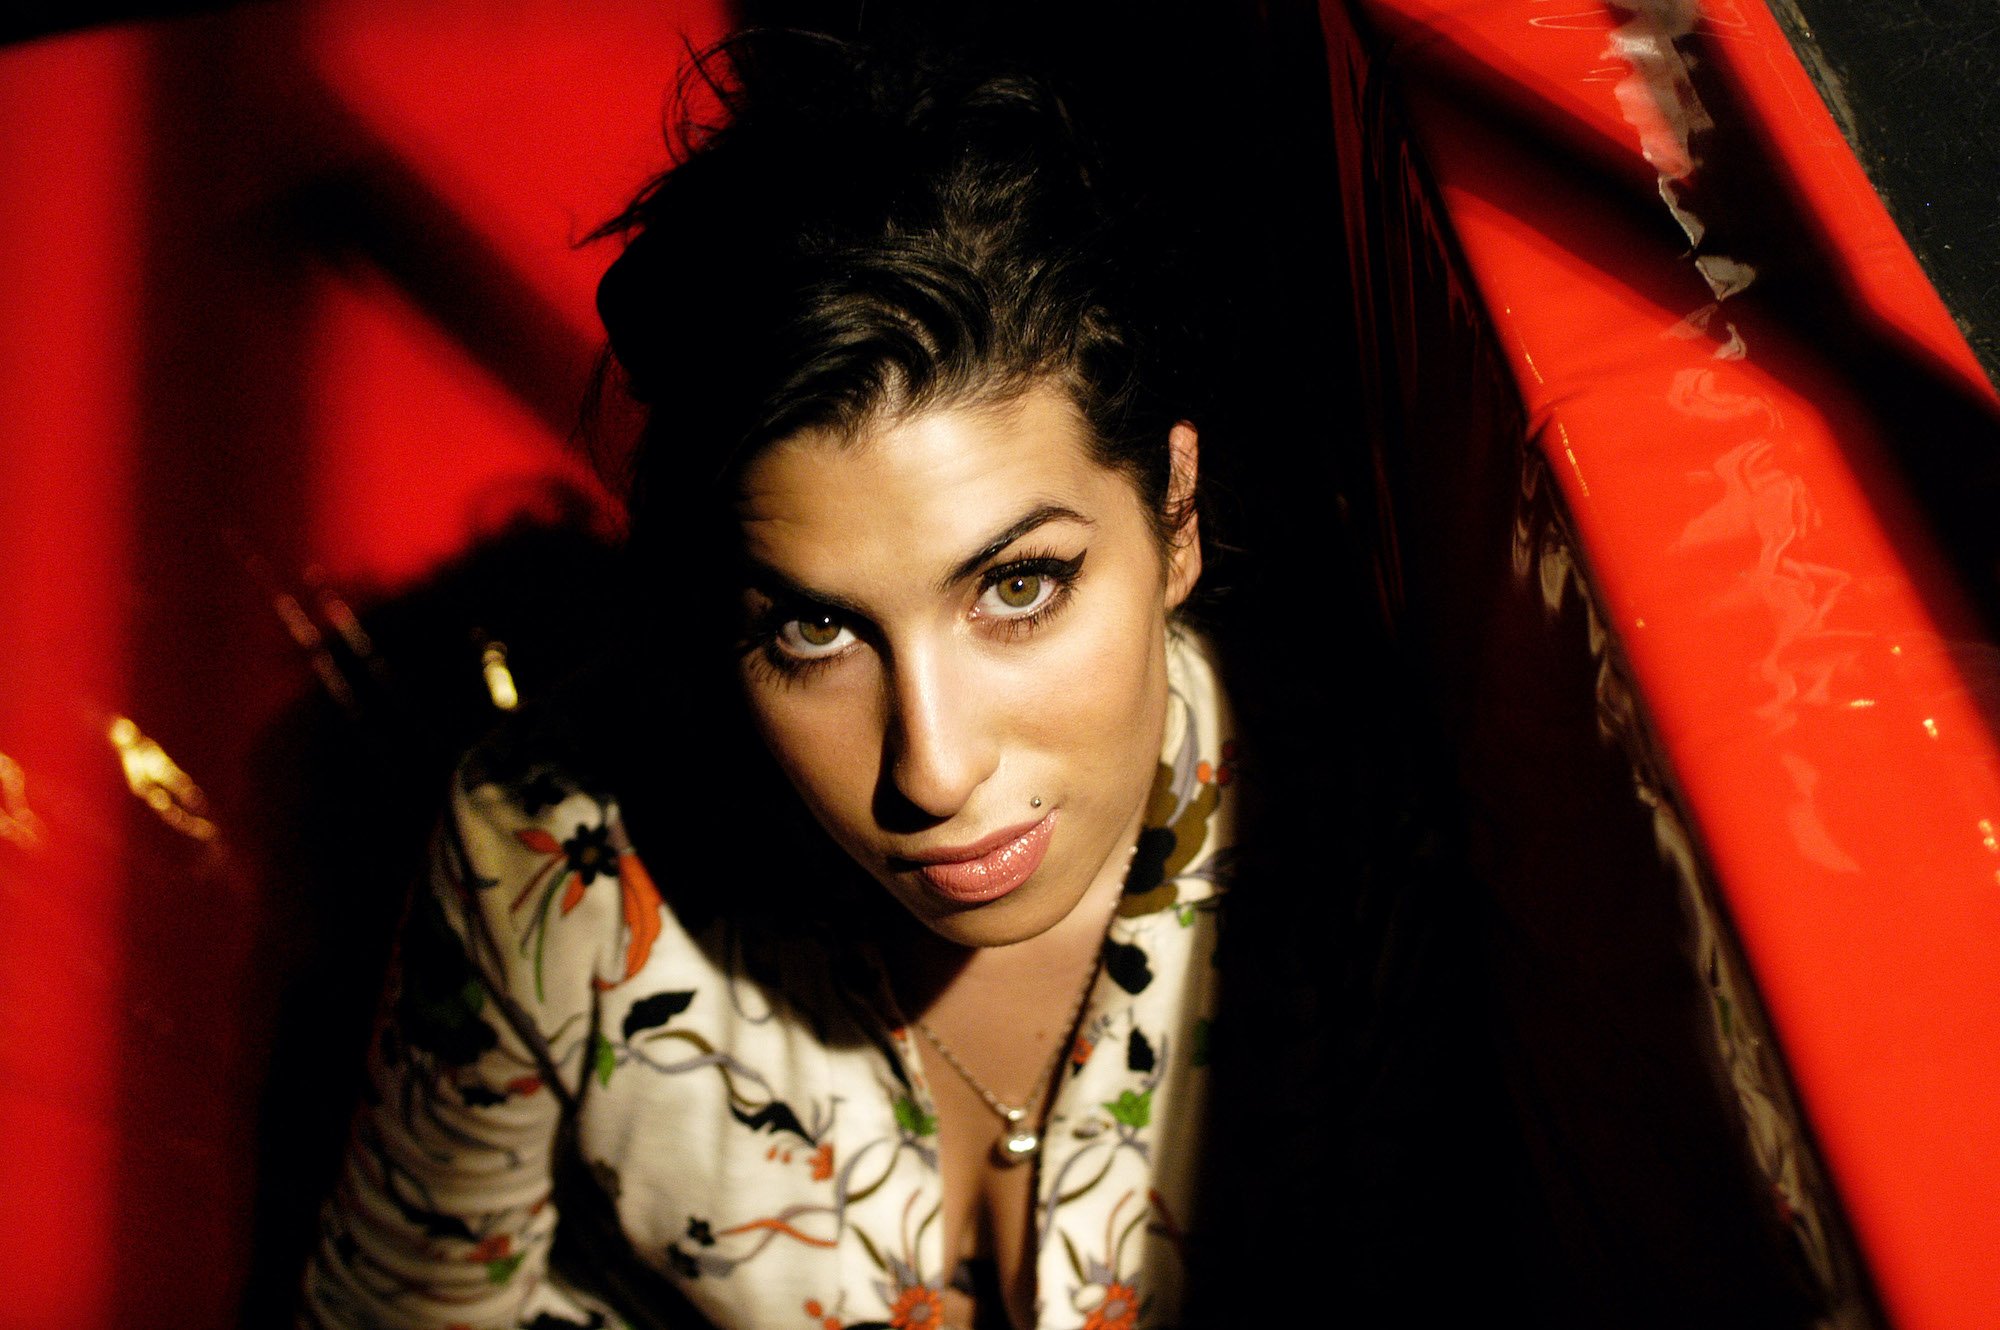 Amy Winehouse smiling, looking up at the camera